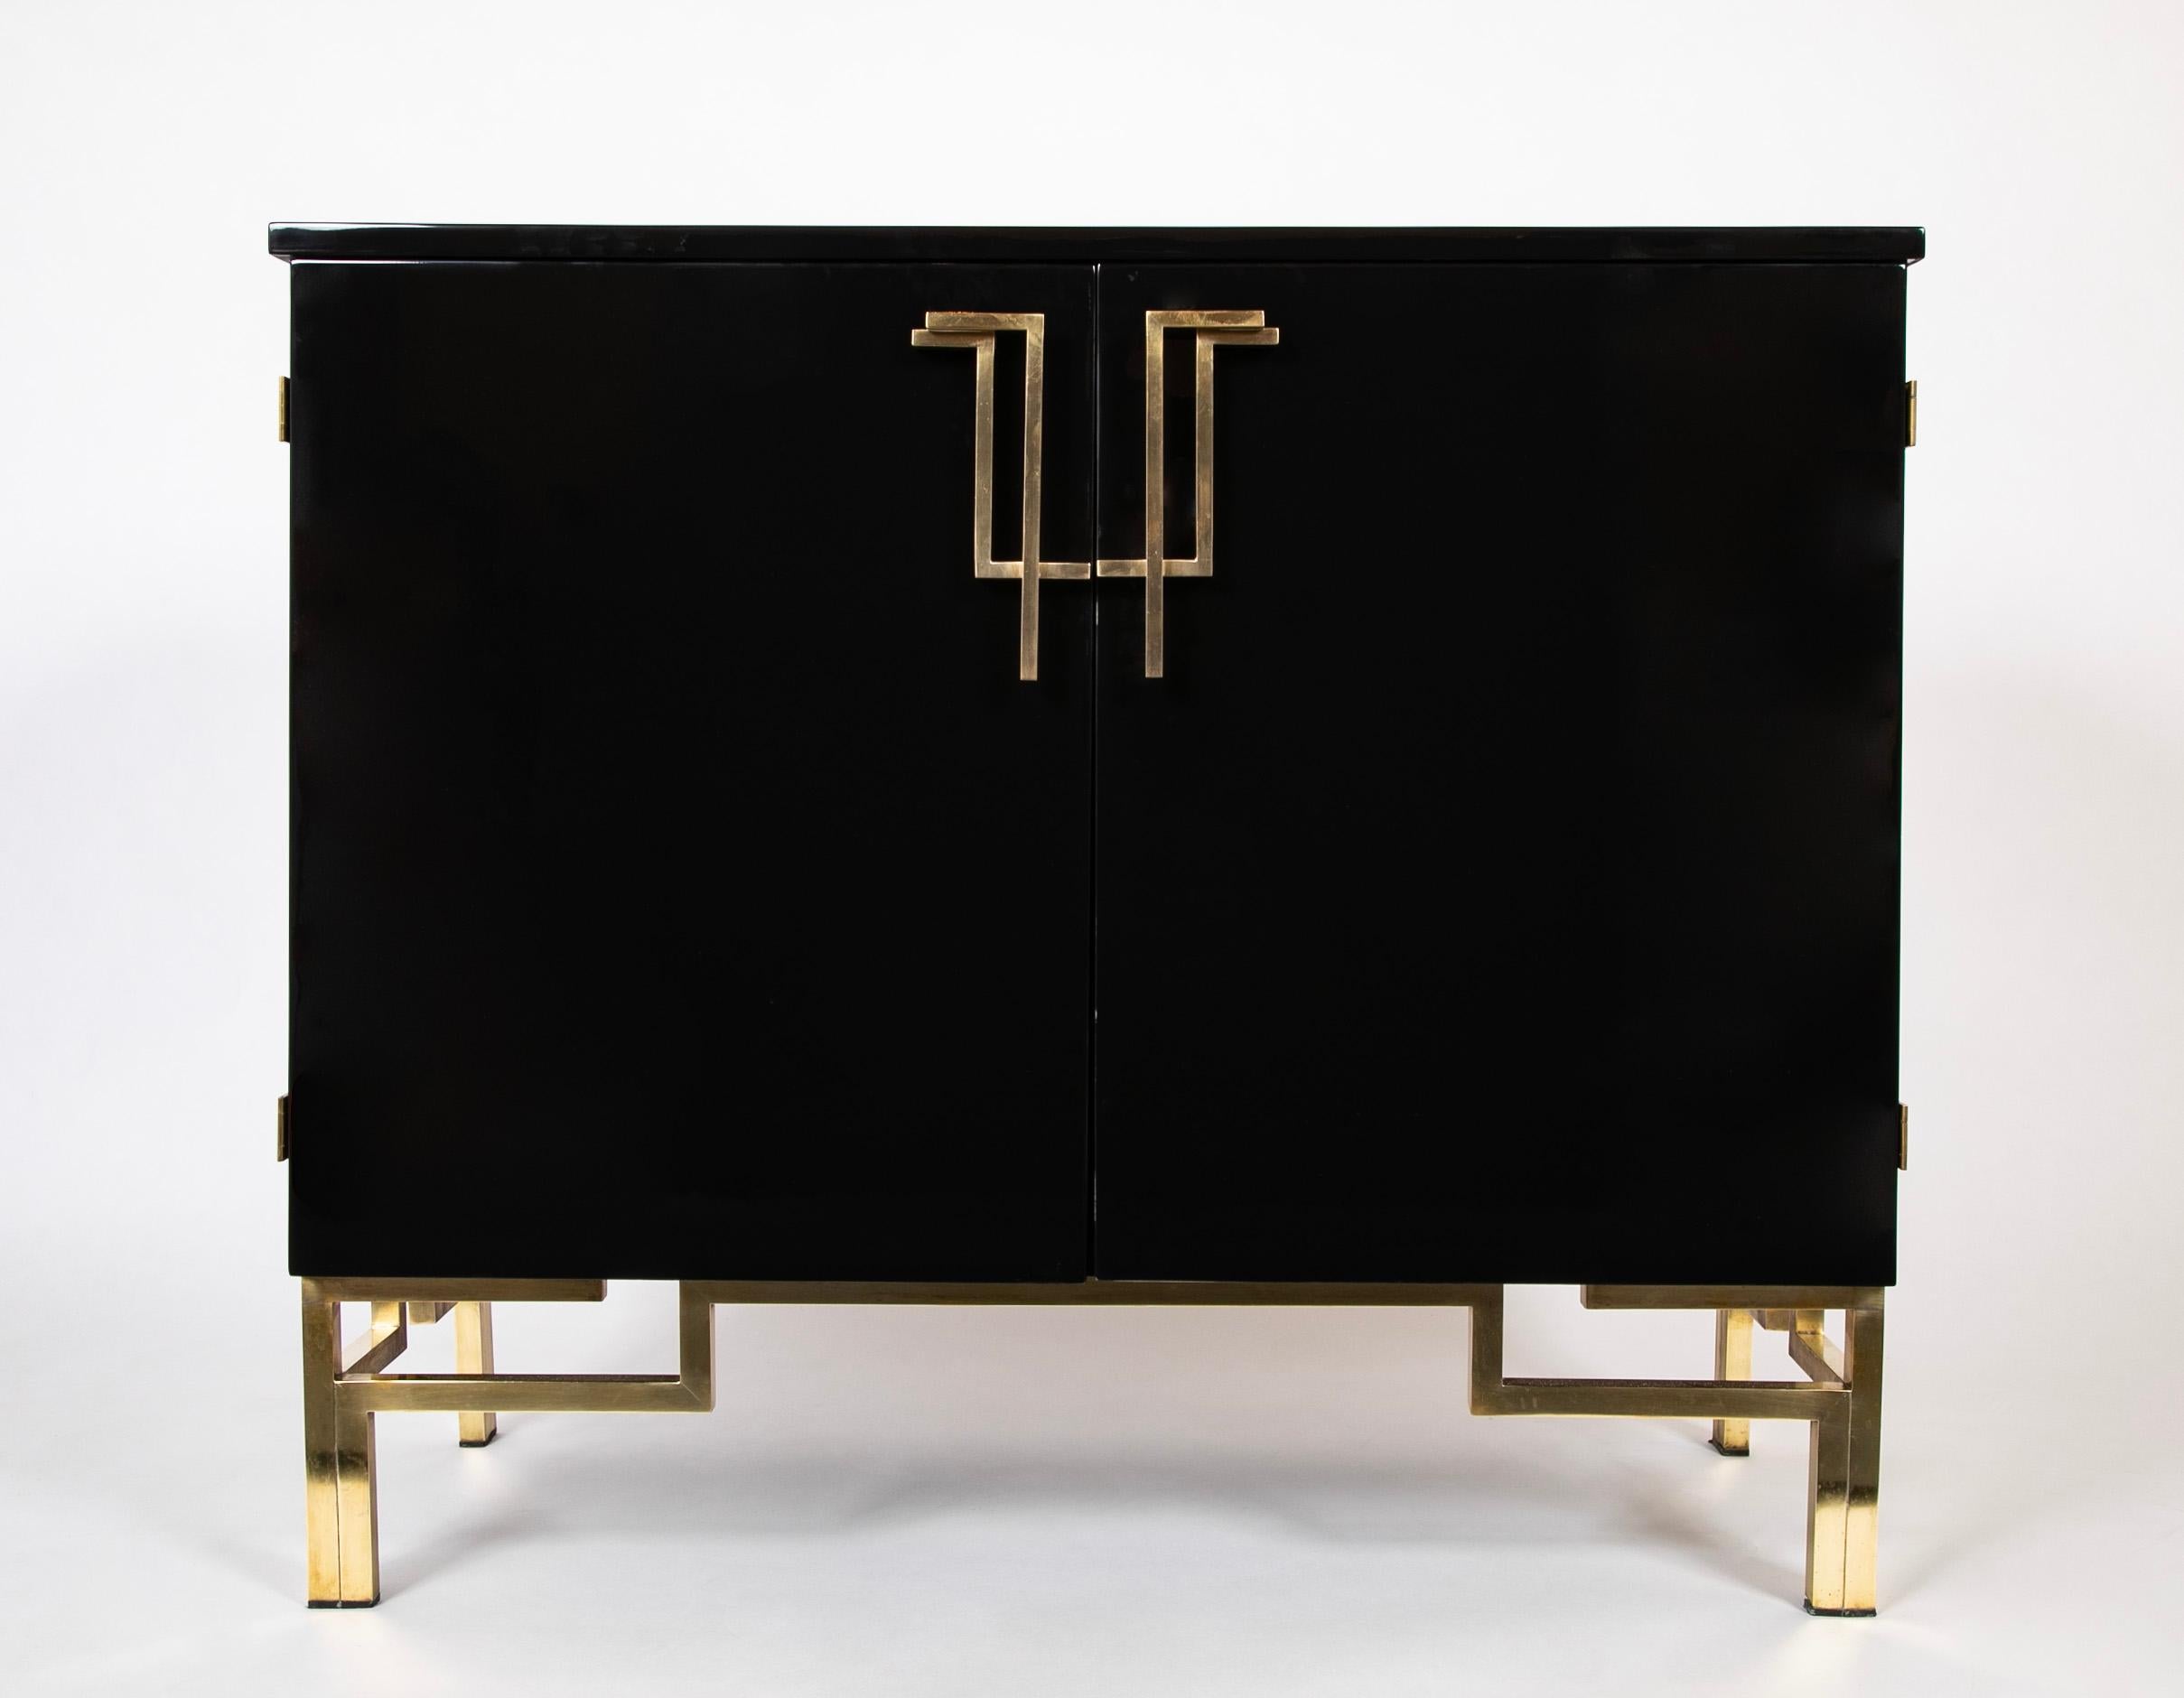 A wonderfully pared down design by Guy Lefevre,  this piece represents a period during which Maison Jansen was shifting under Lefevres design leadership to a much more modern/ contemporary aesthetic circa 1970.   The black lacquer cabinet has